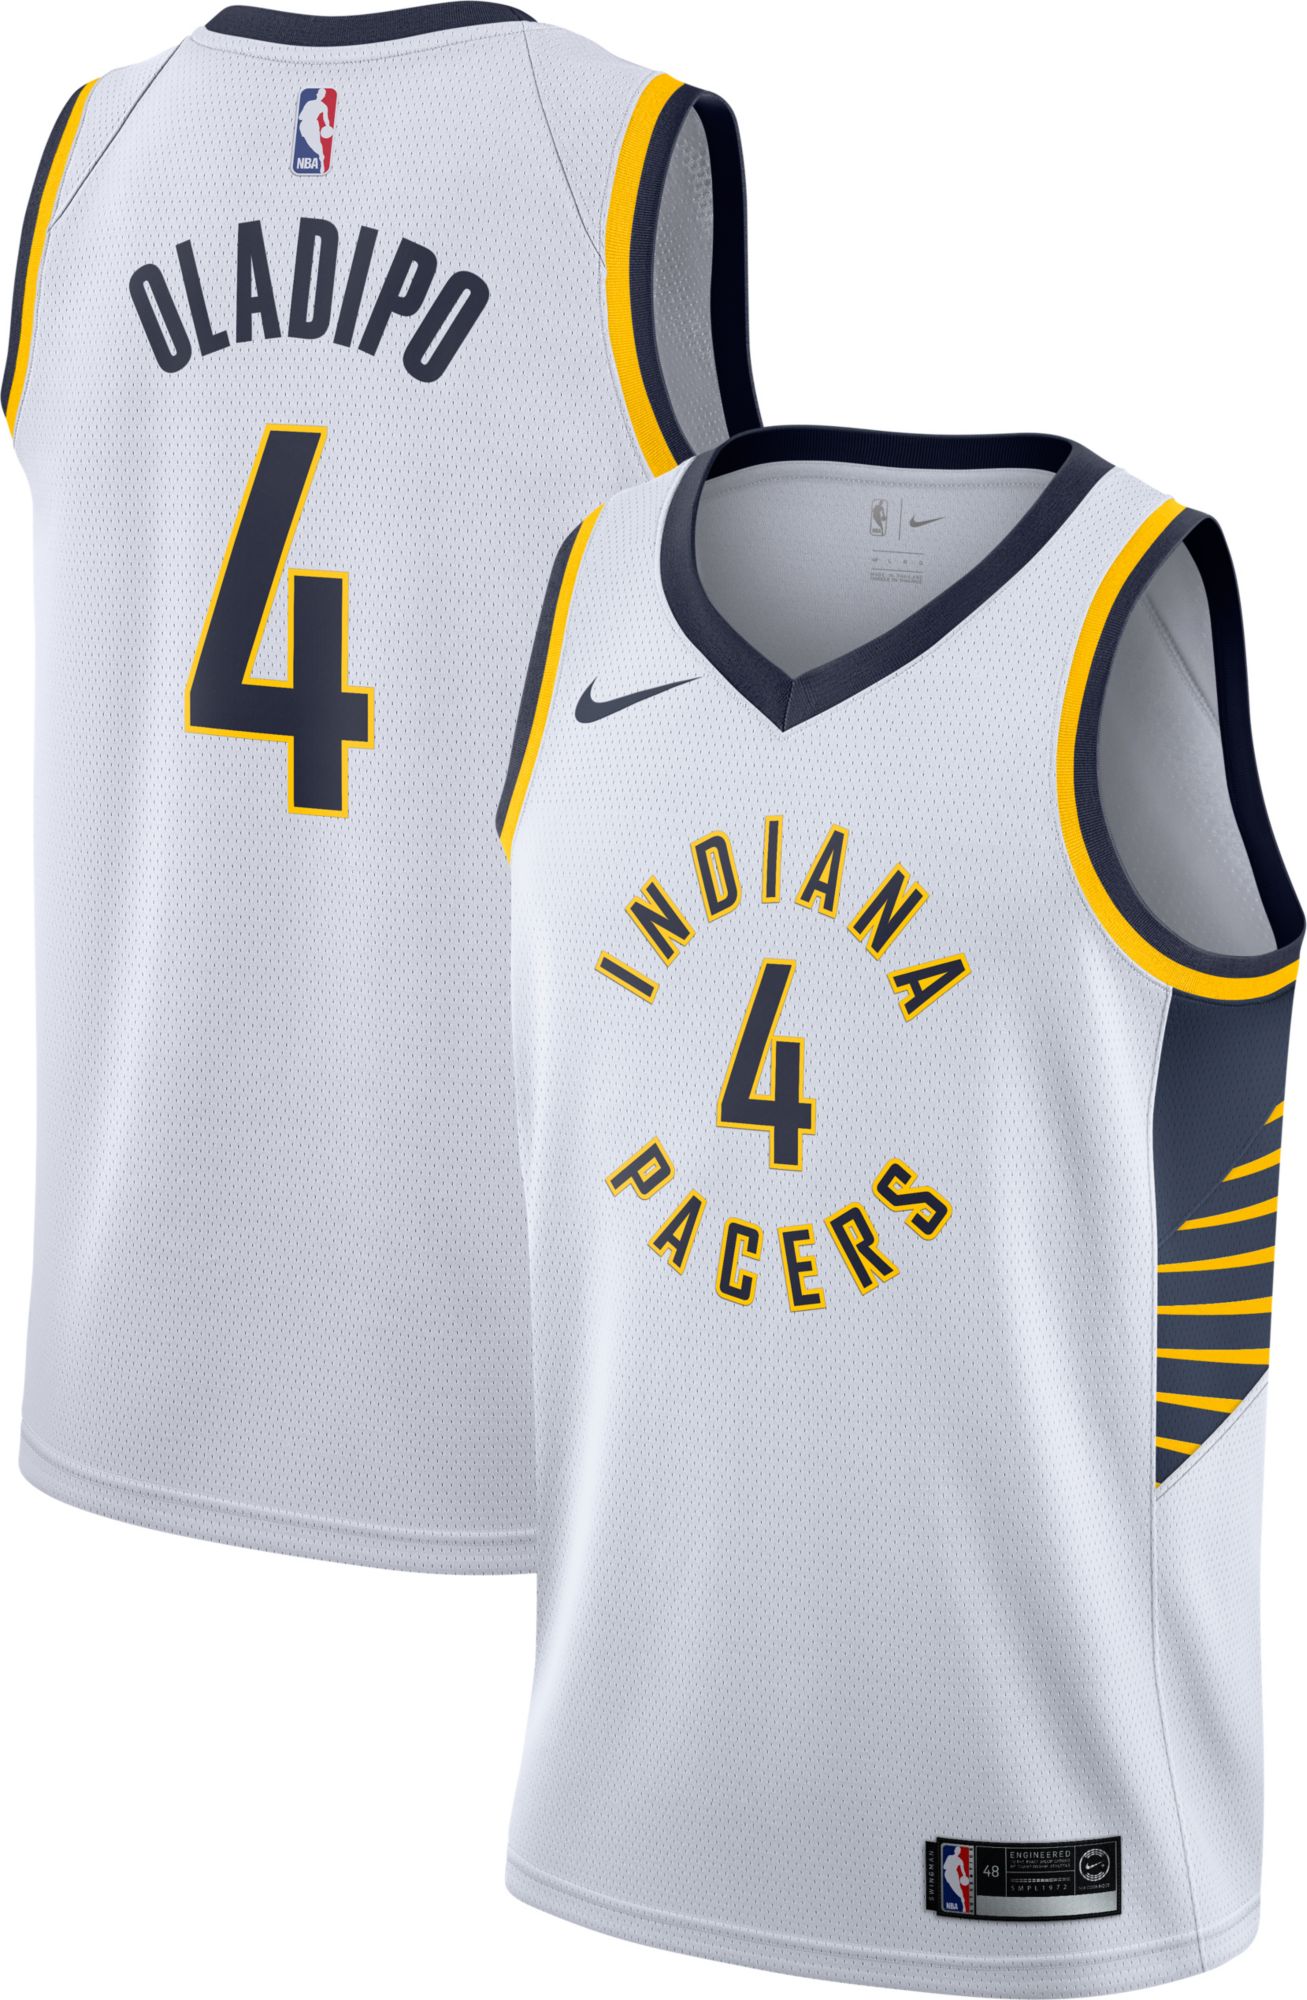 pacers jersey white